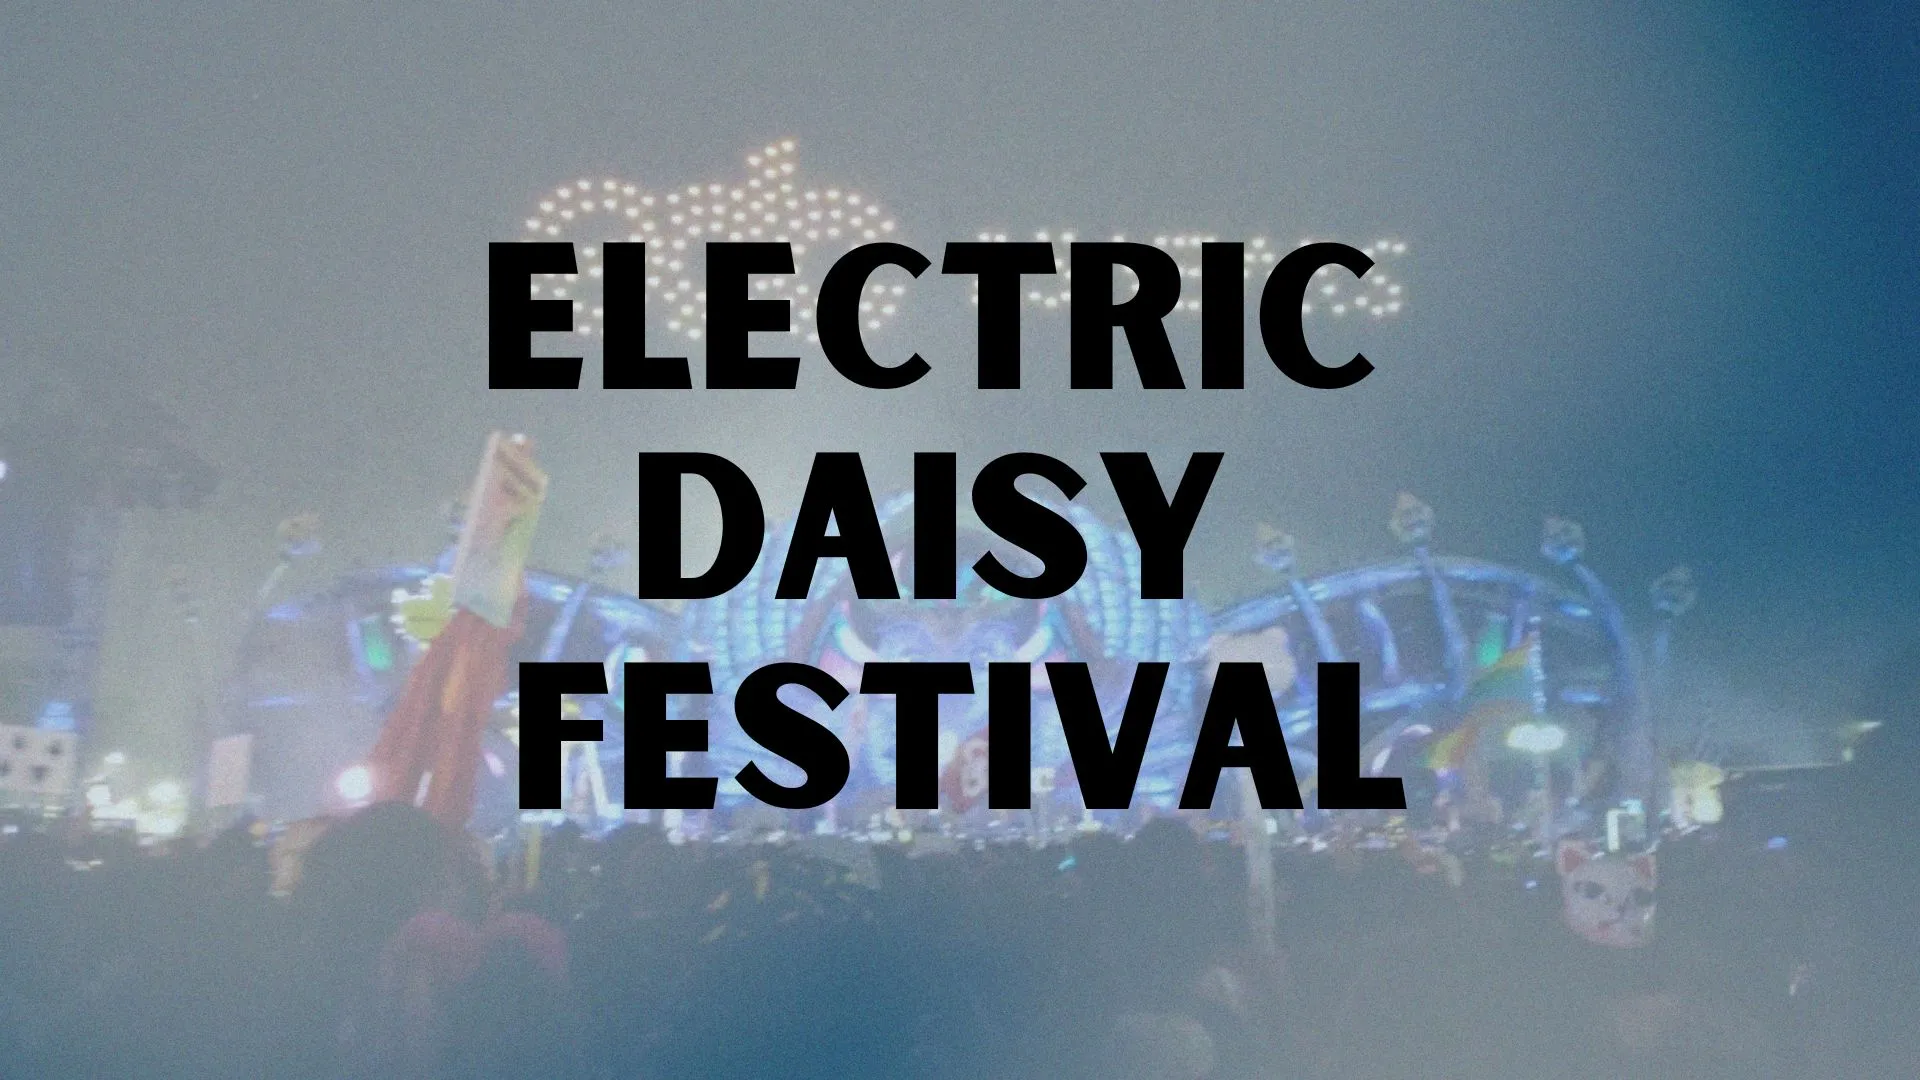 Electric Daisy Festival Tickets and More